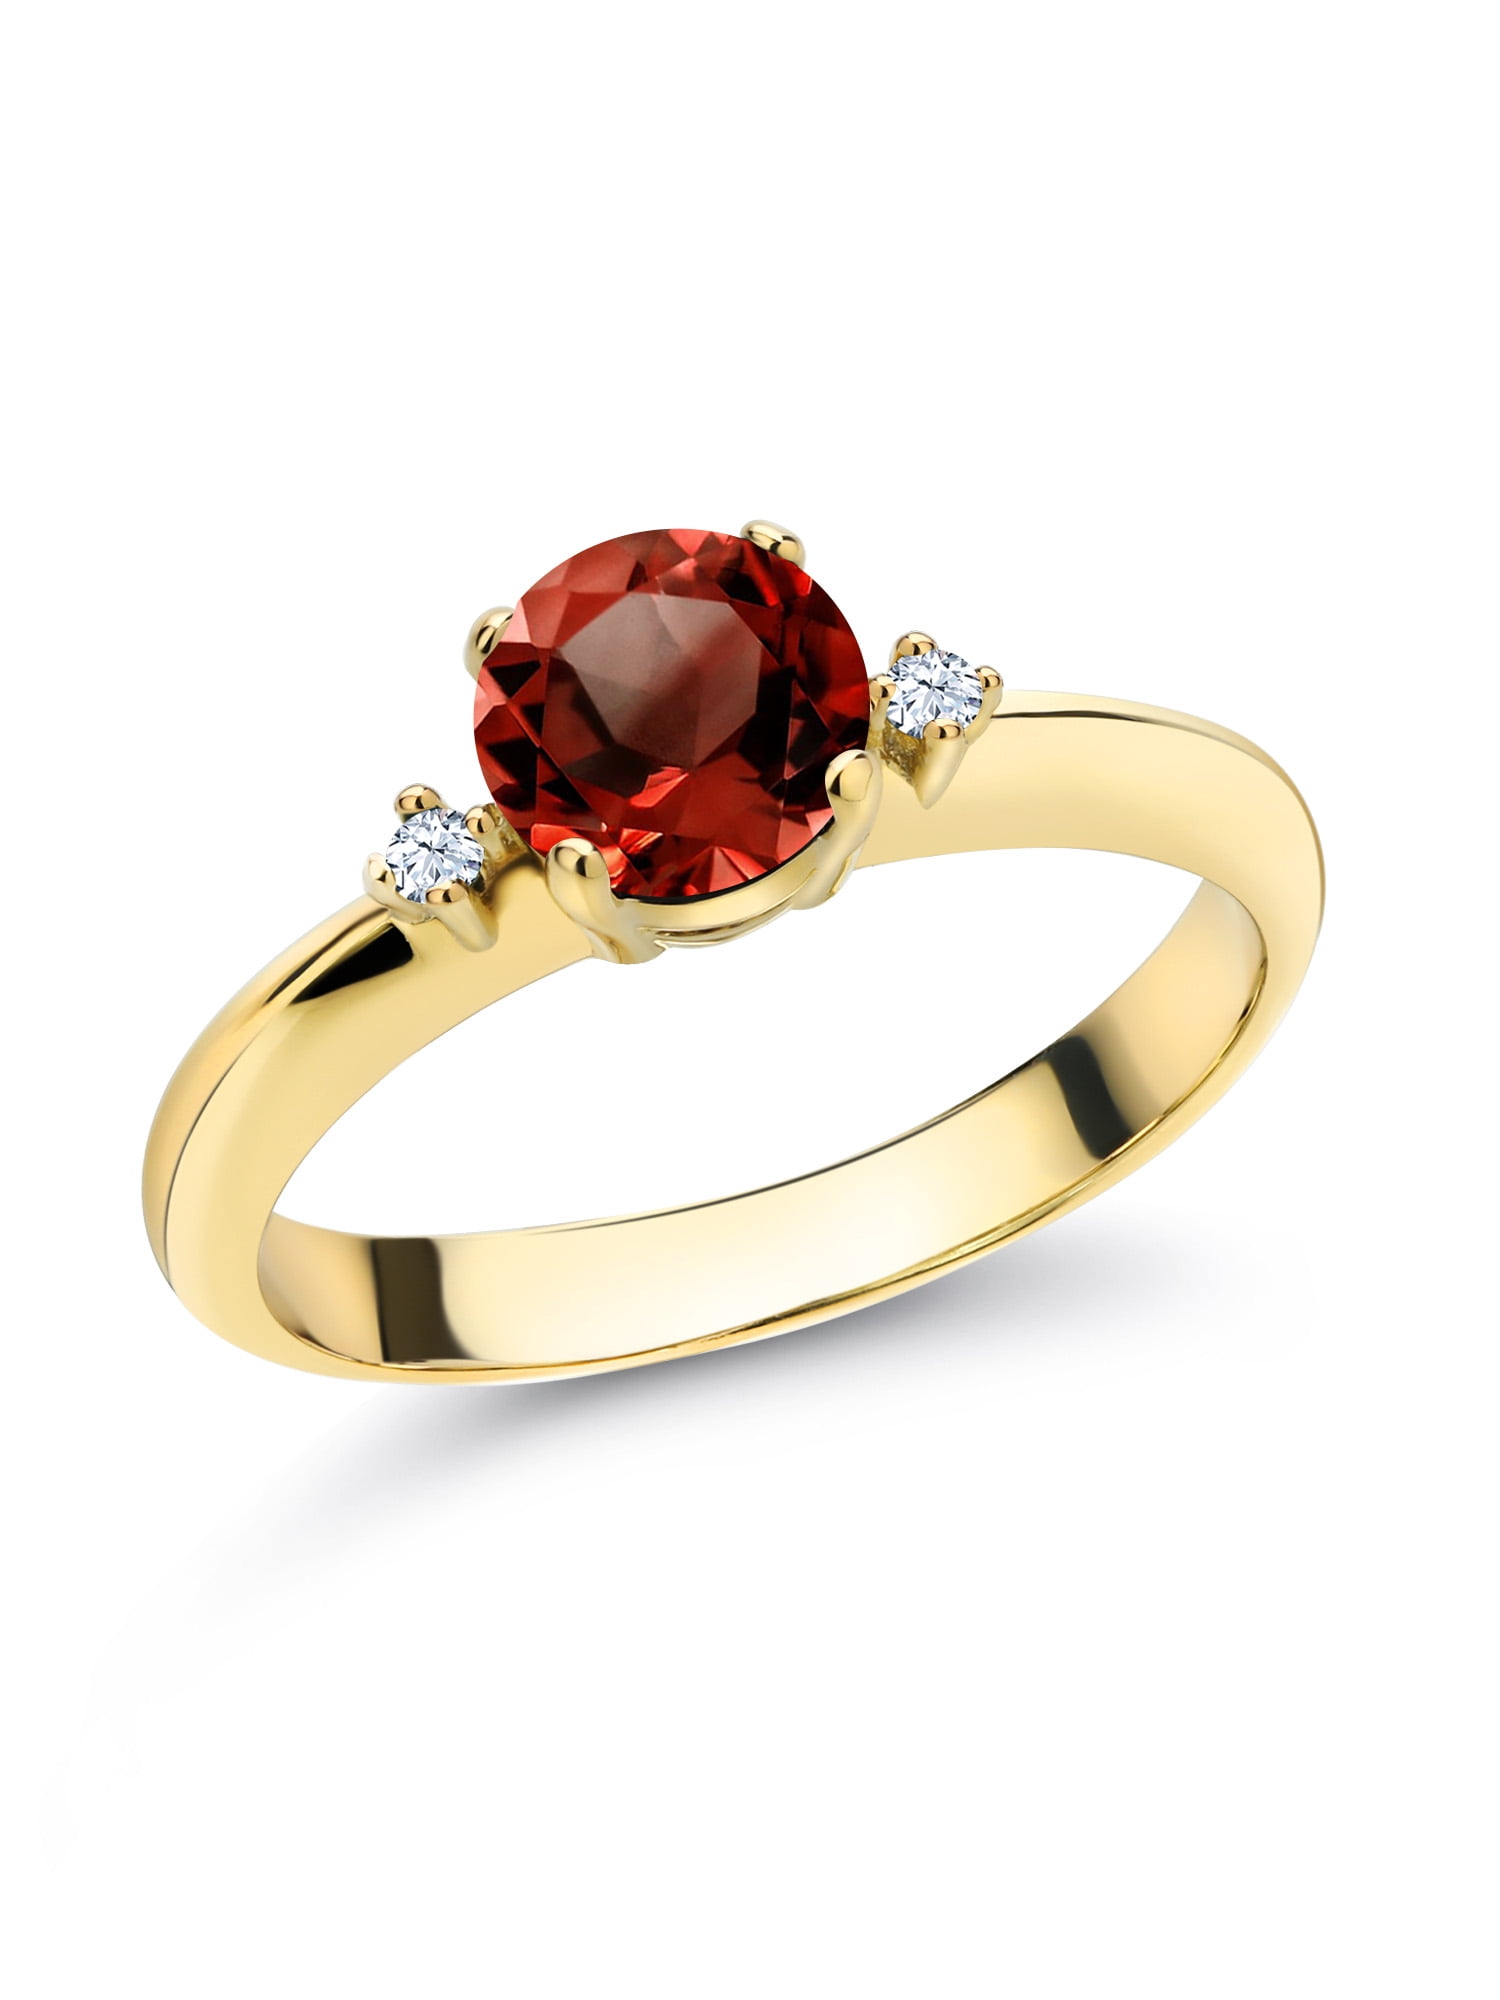 Gem Stone King 1.20 Ct Round White Topaz Red Ruby 925 Yellow Gold Plated Silver 3-Stone Ring